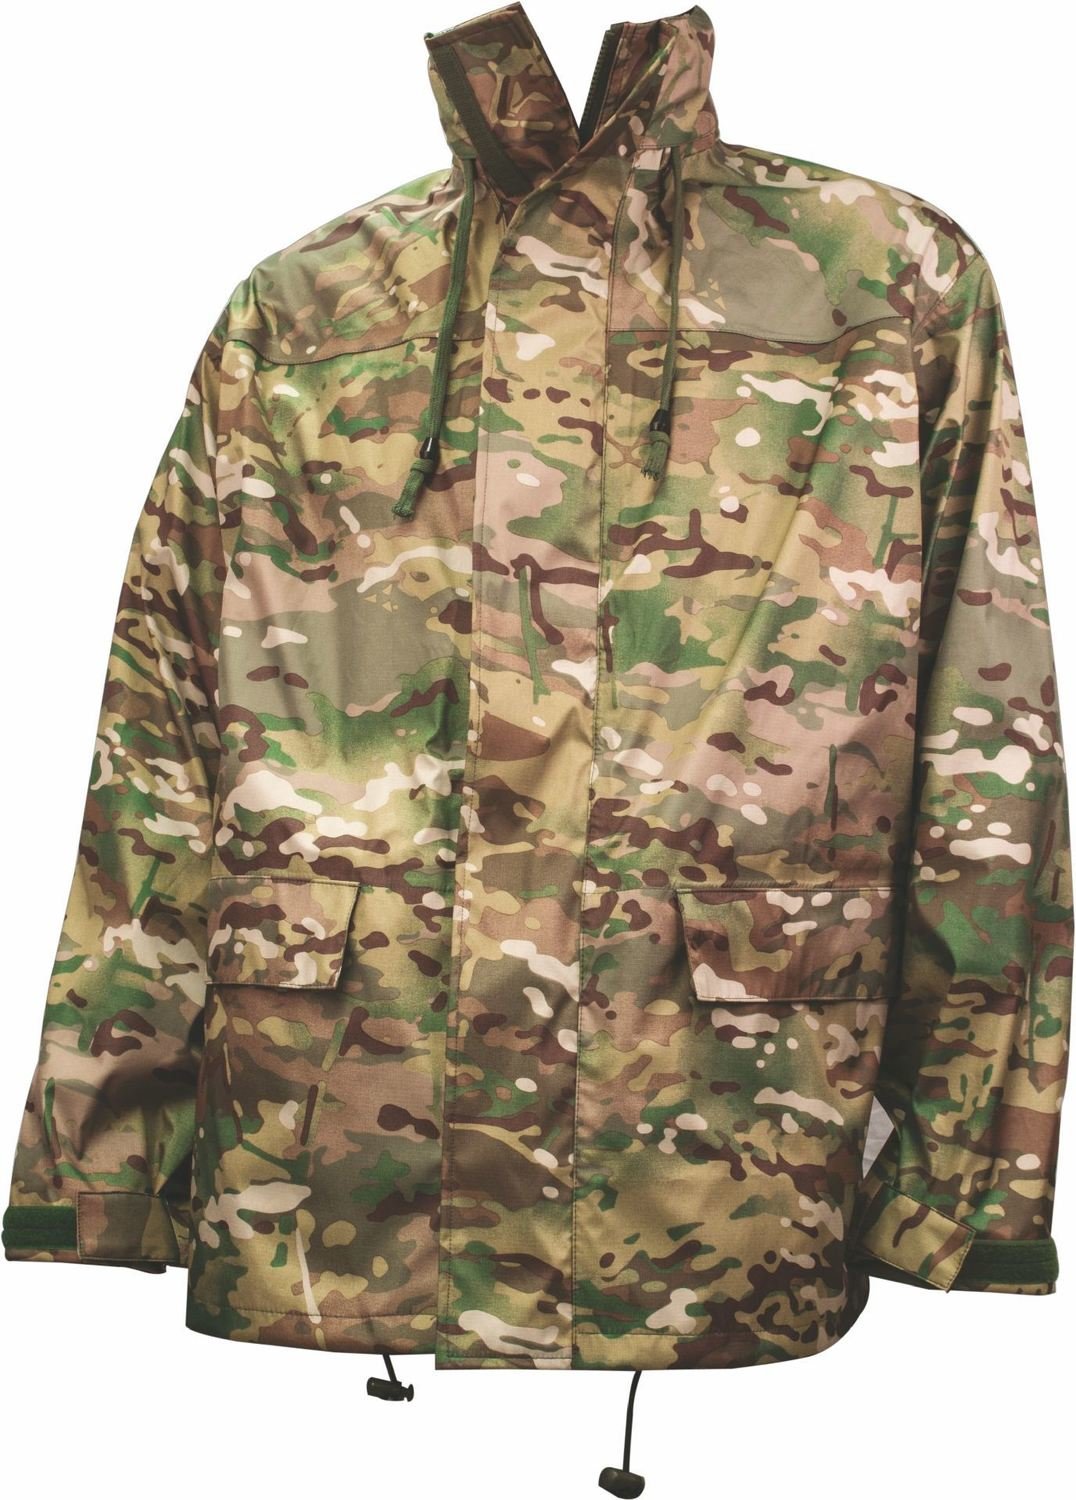 New British Army Mtp Style Camouflage Gore Tex Waterproof Jackets